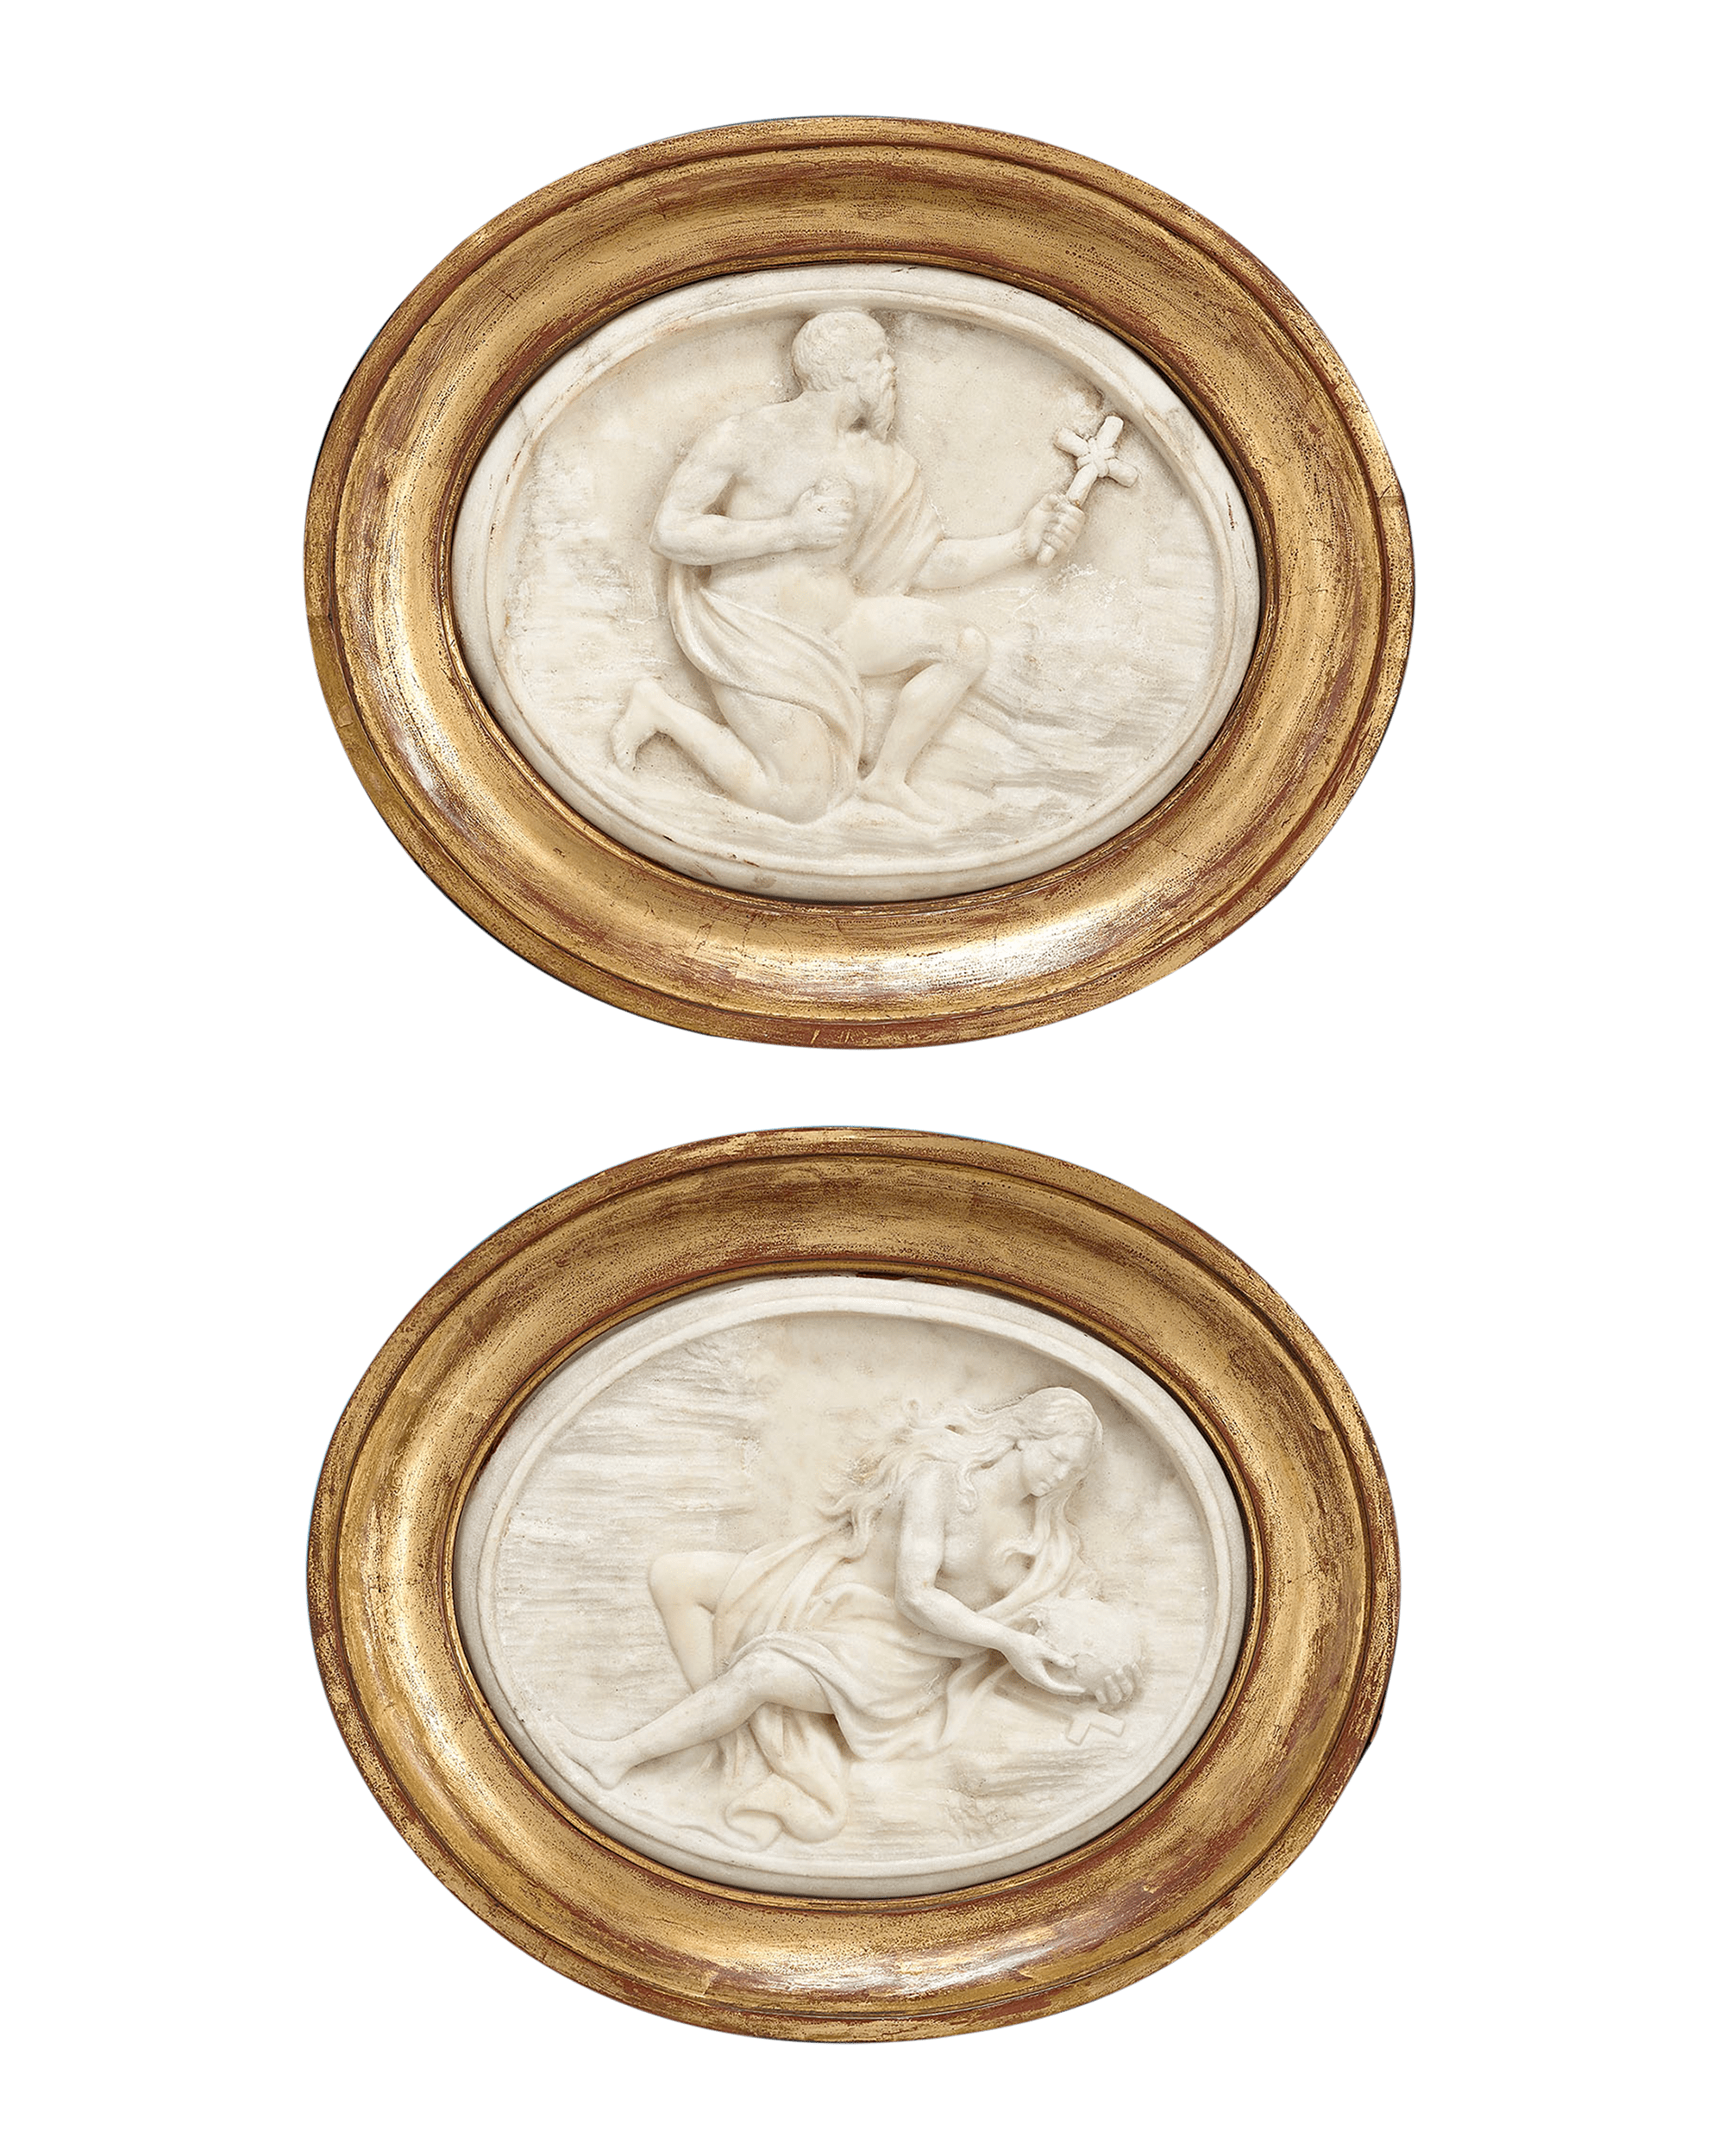 These remarkable marble carved plaques depict St. Jerome and Mary Magdalene